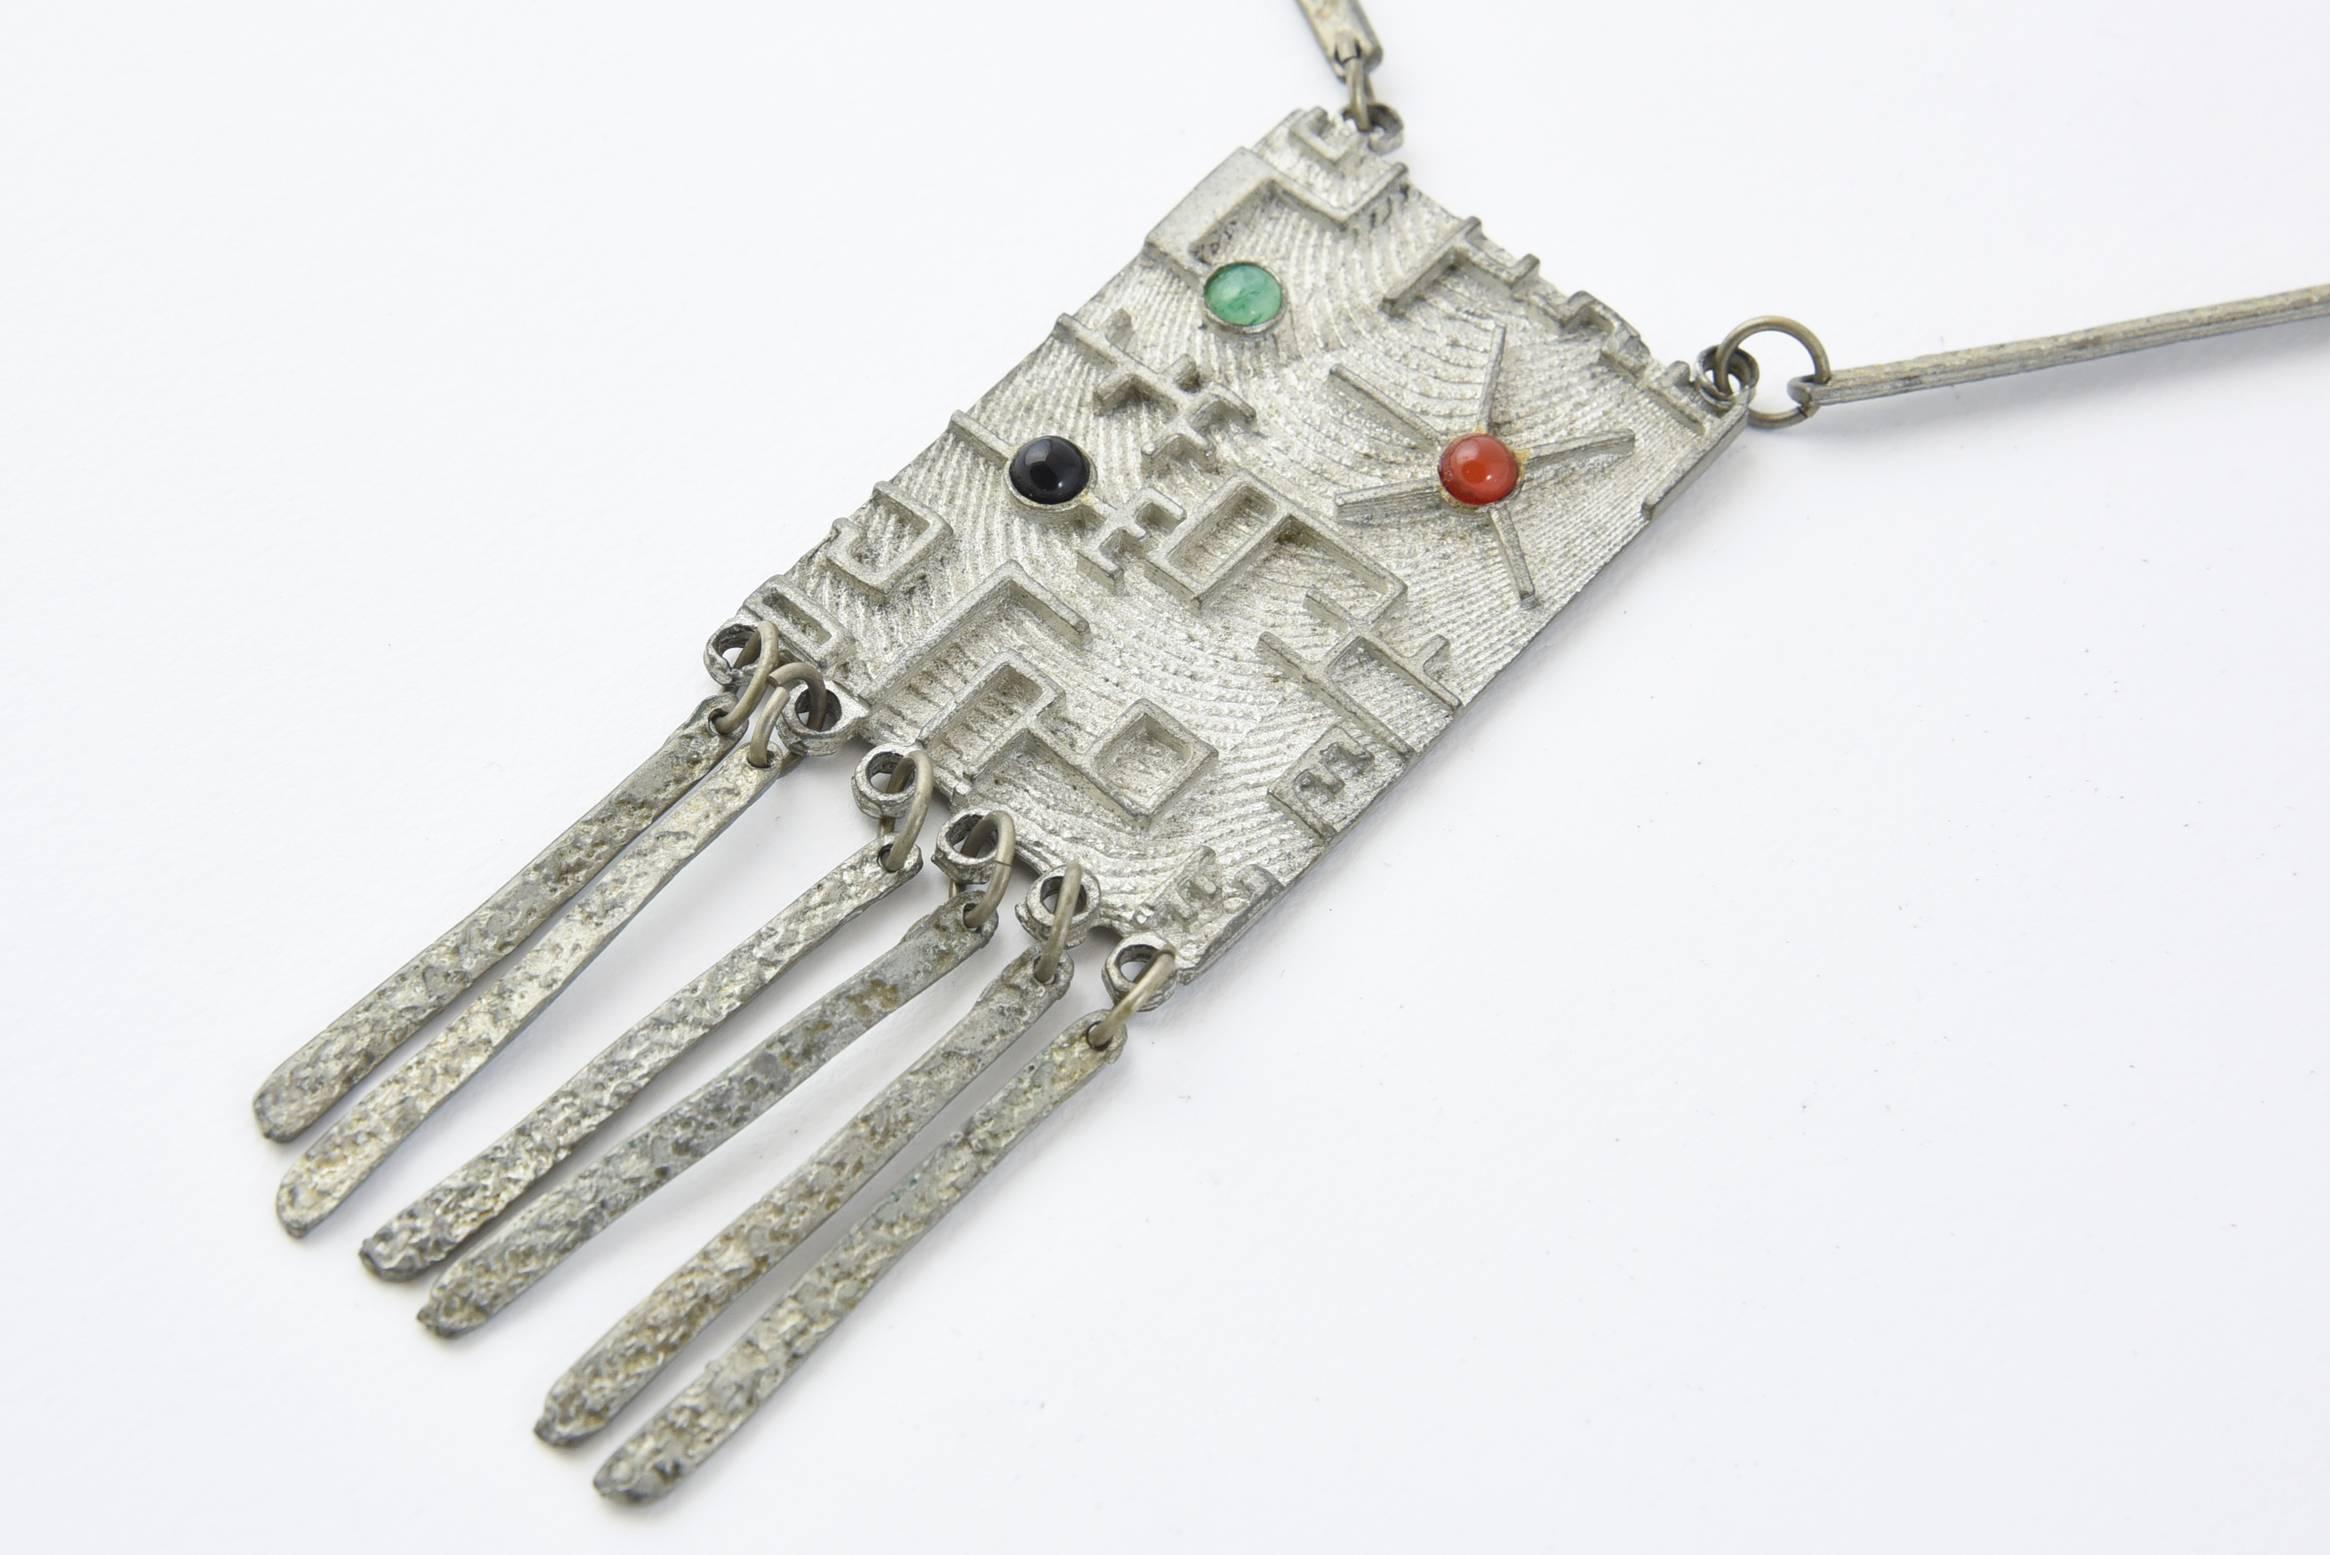 Interesting Space Age Modernist Brutalist Necklace featuring a maze design with gemstones and silver tassels.  Made of sterling silver
Marked Sterling with a AR makers mark